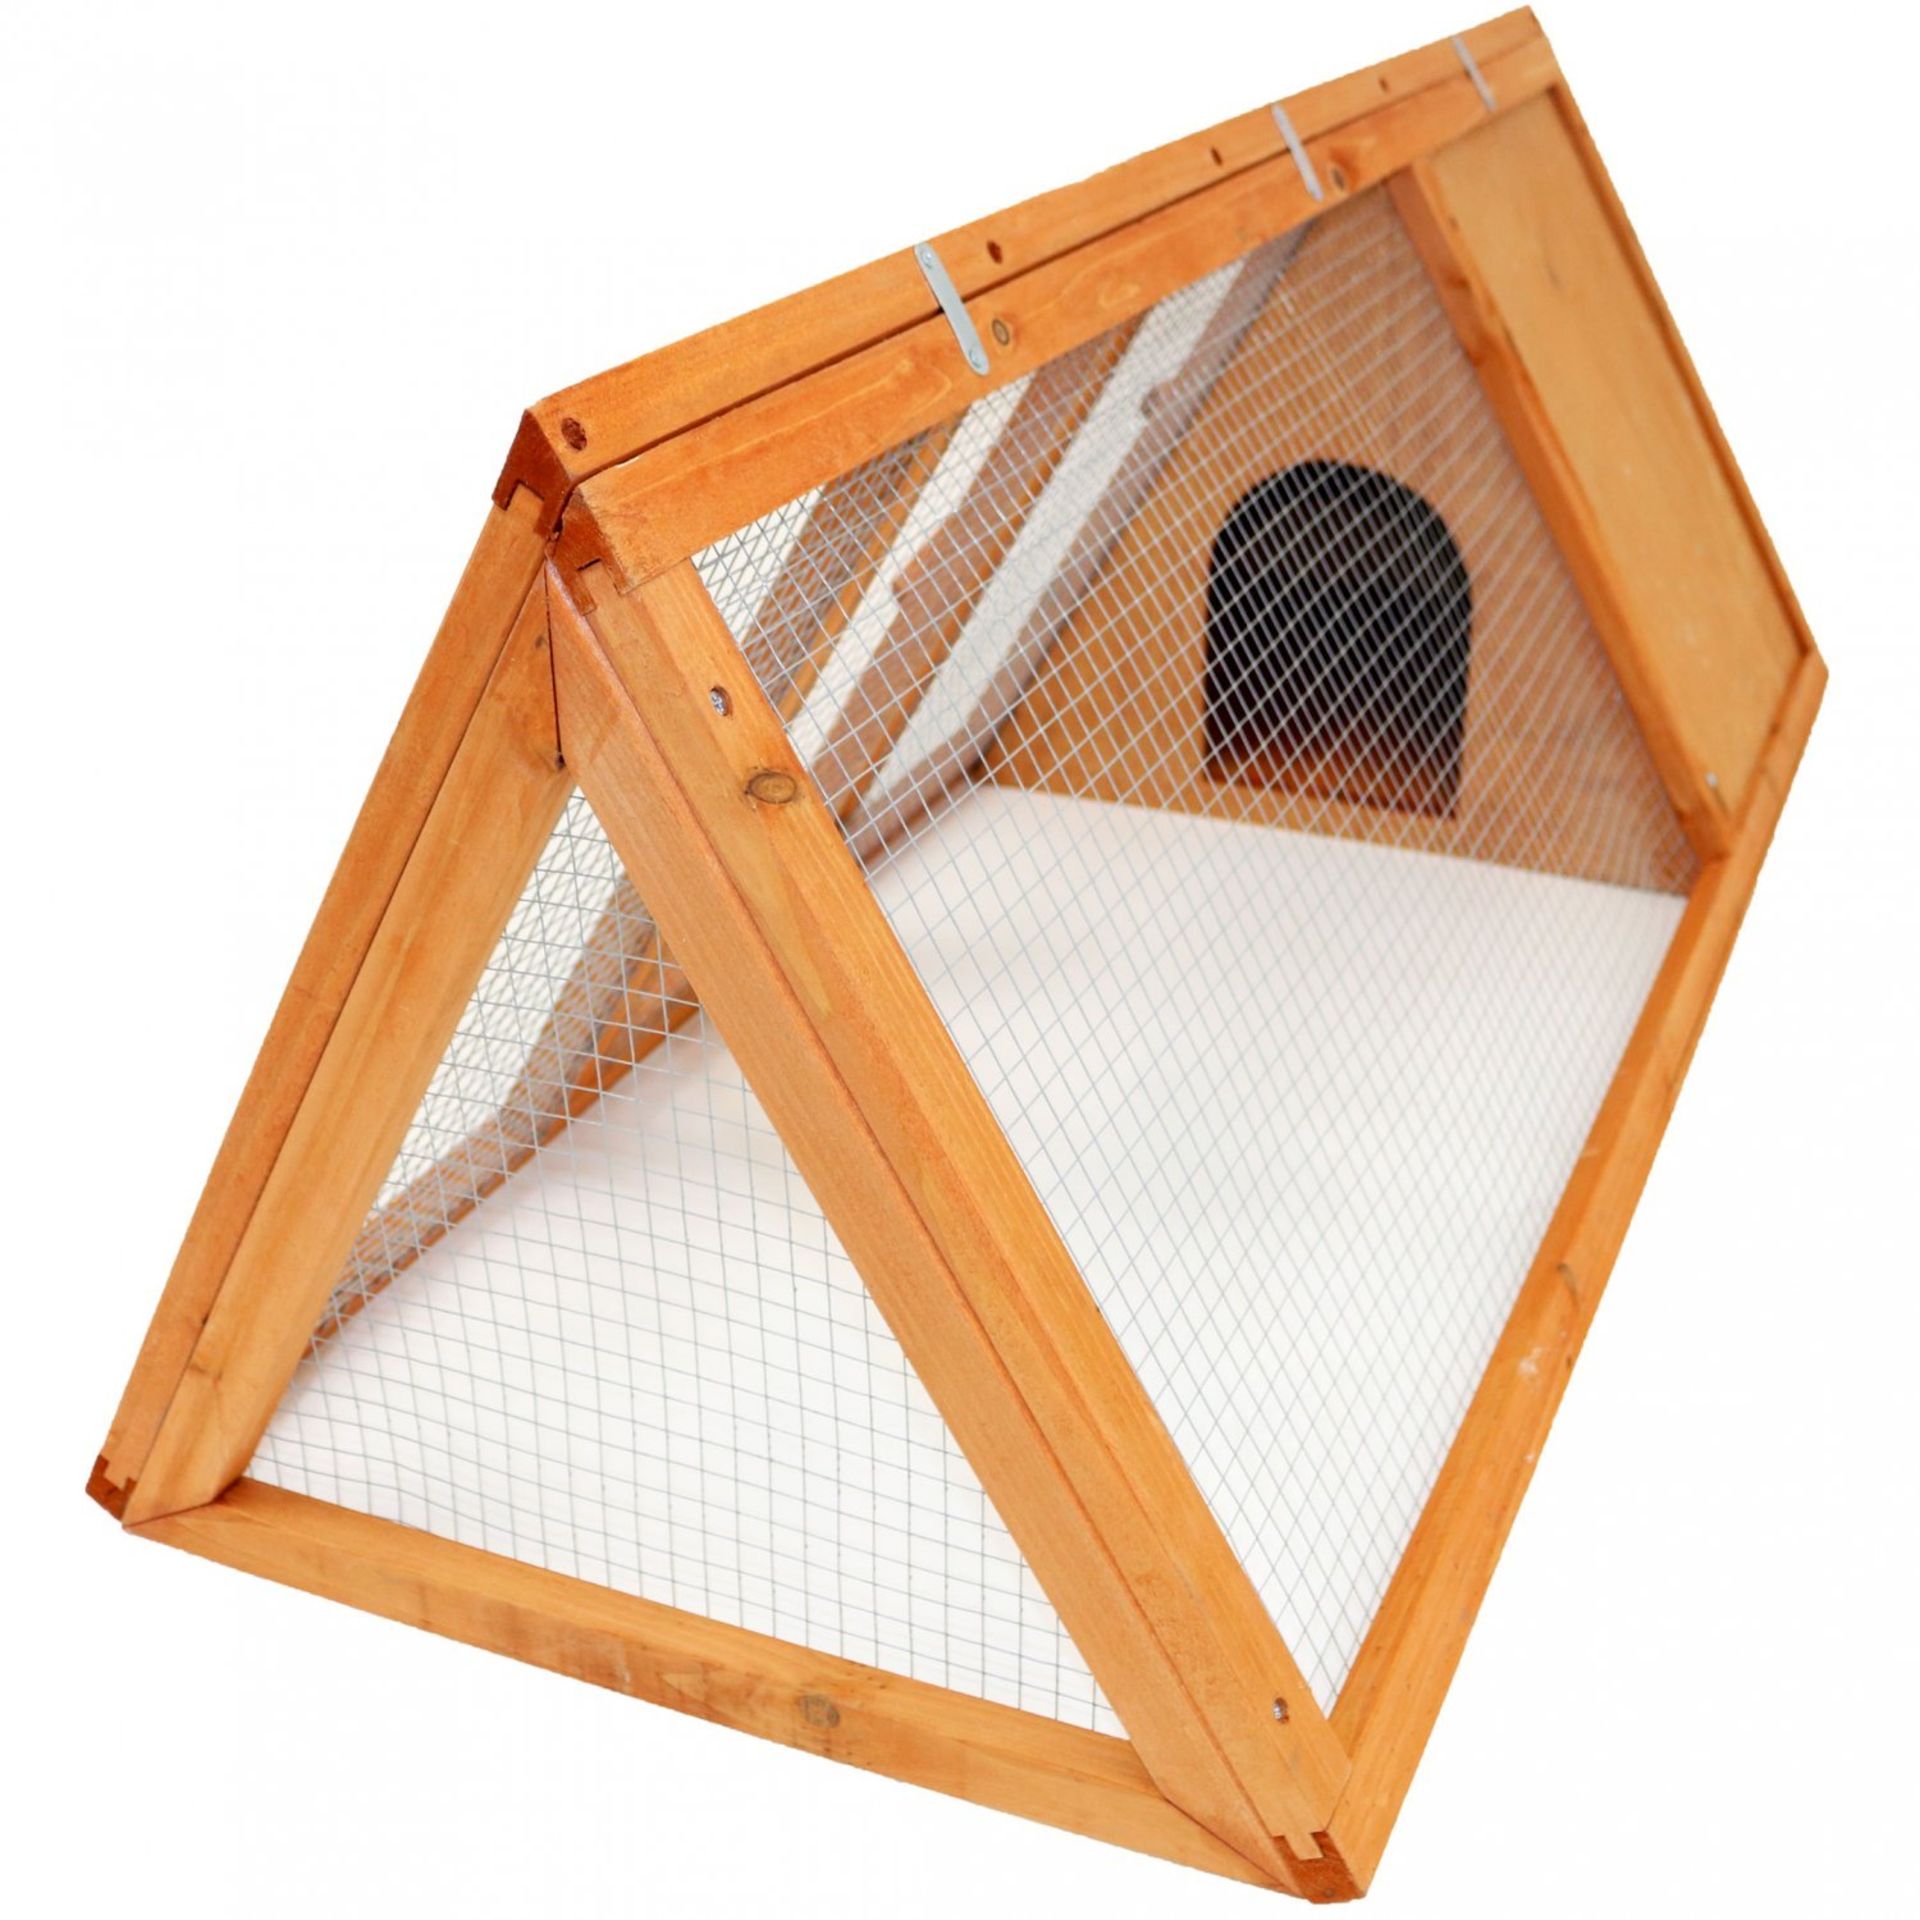 (EE546) Wooden Outdoor Triangle Rabbit Guinea Pig Pet Hutch Run Cage High Quality Fir Wood Con... - Image 2 of 4